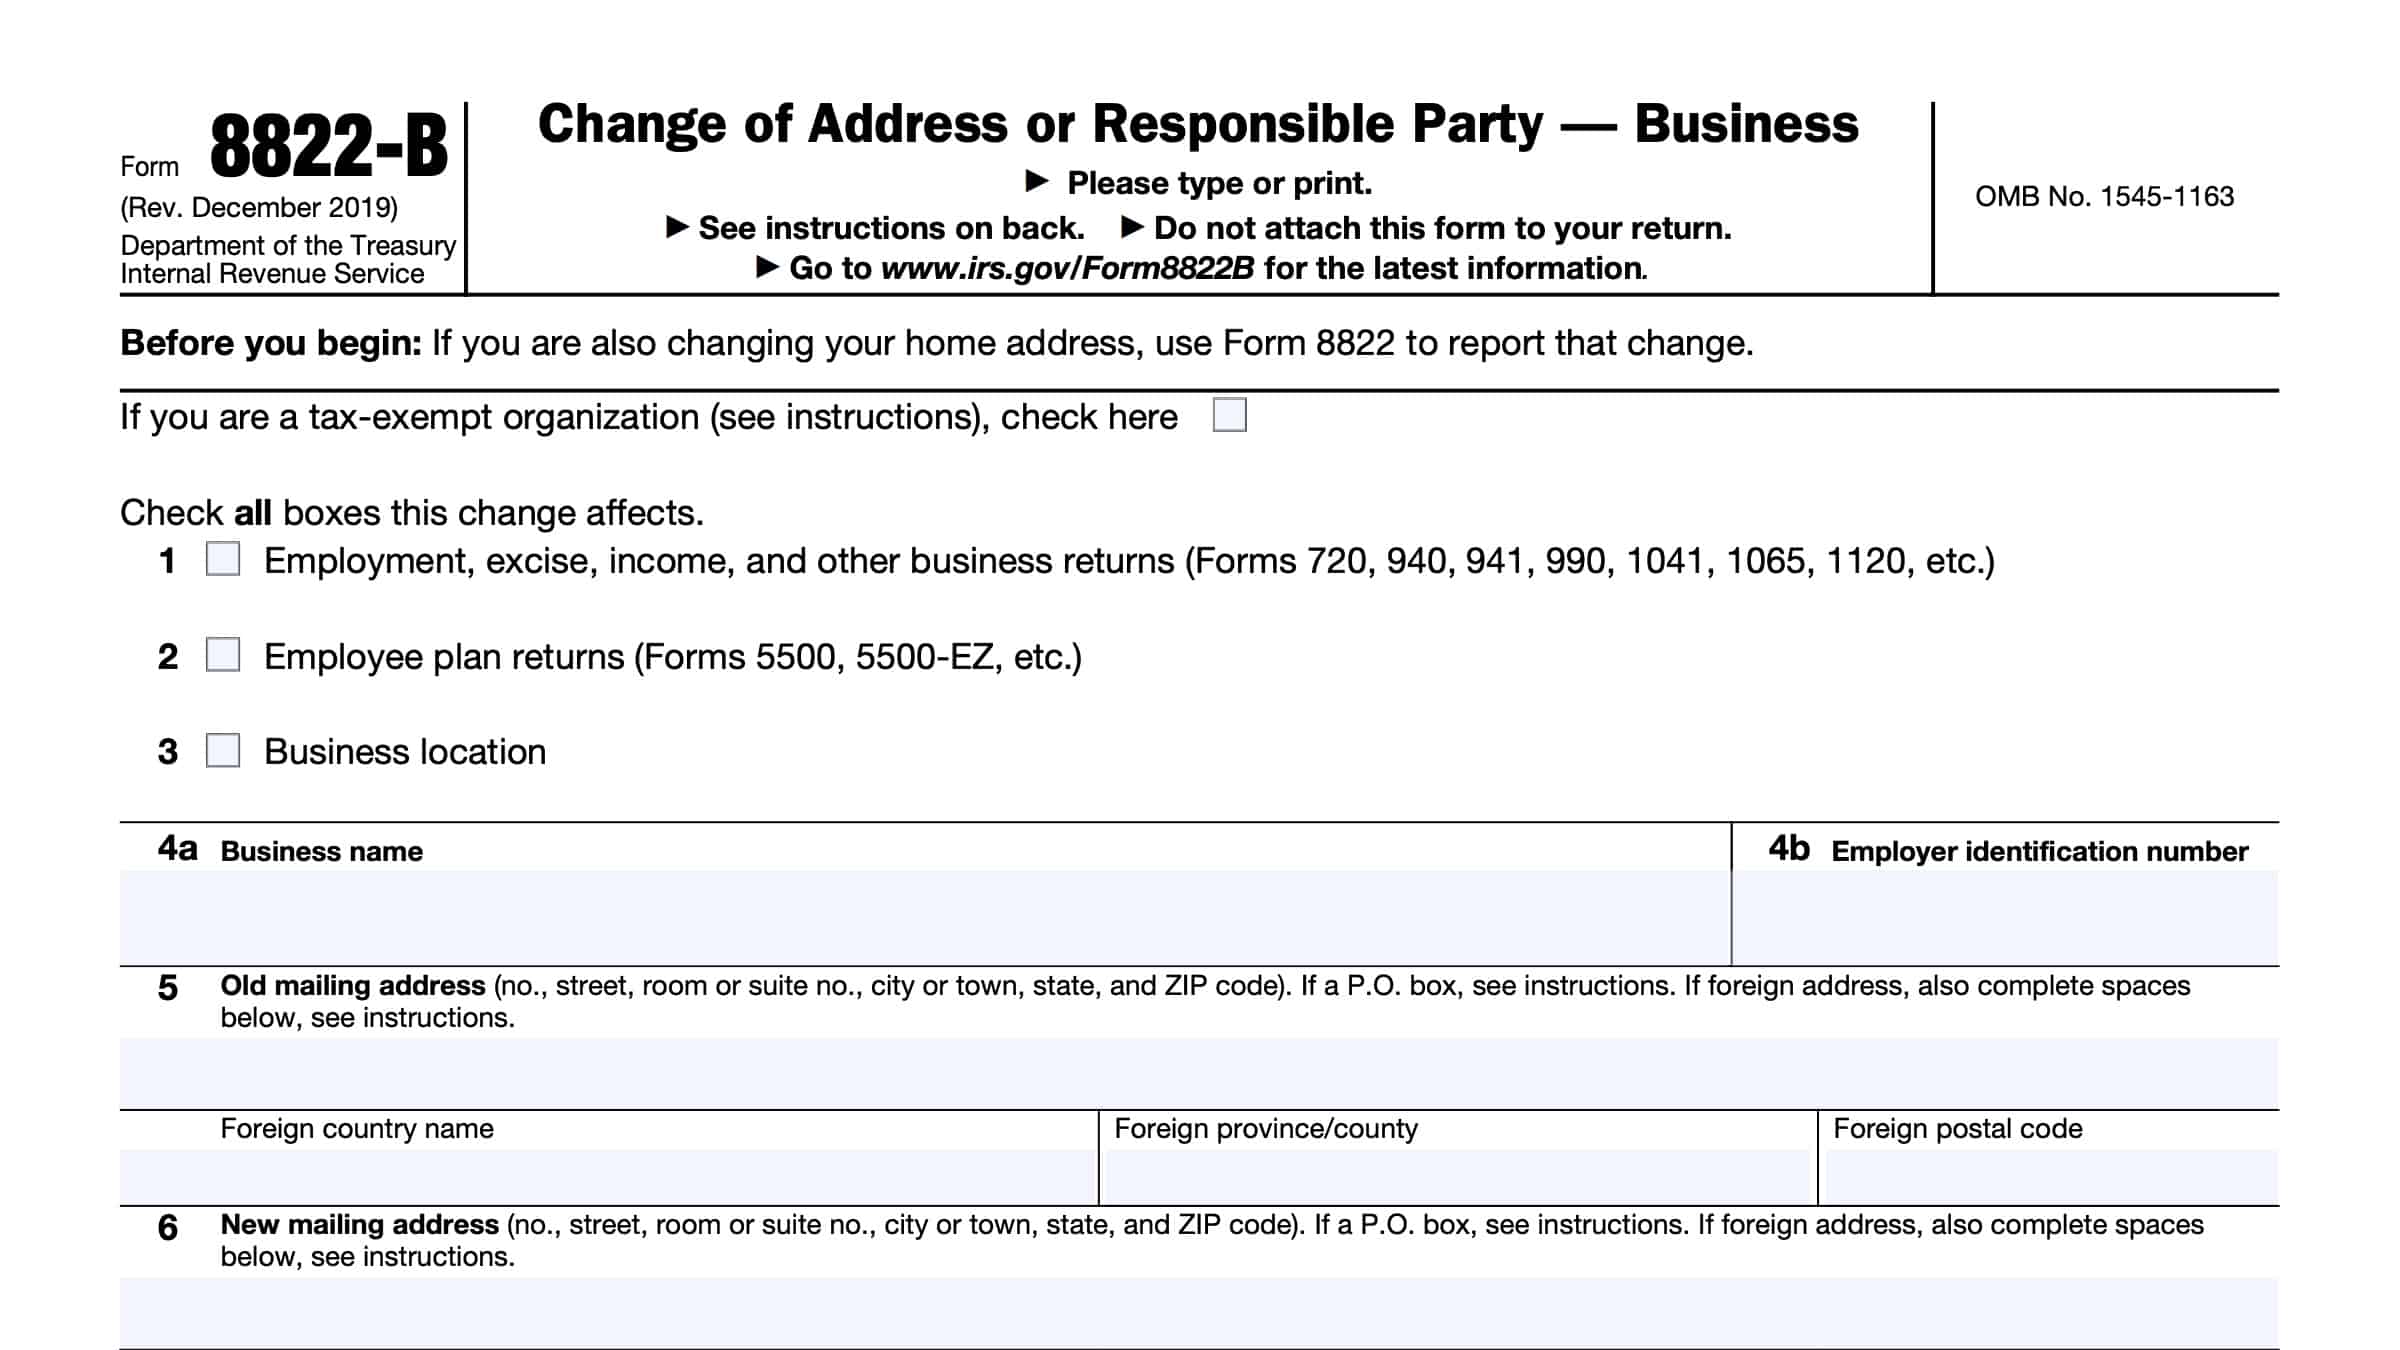 irs-form-8822-b-instructions-change-of-address-or-party